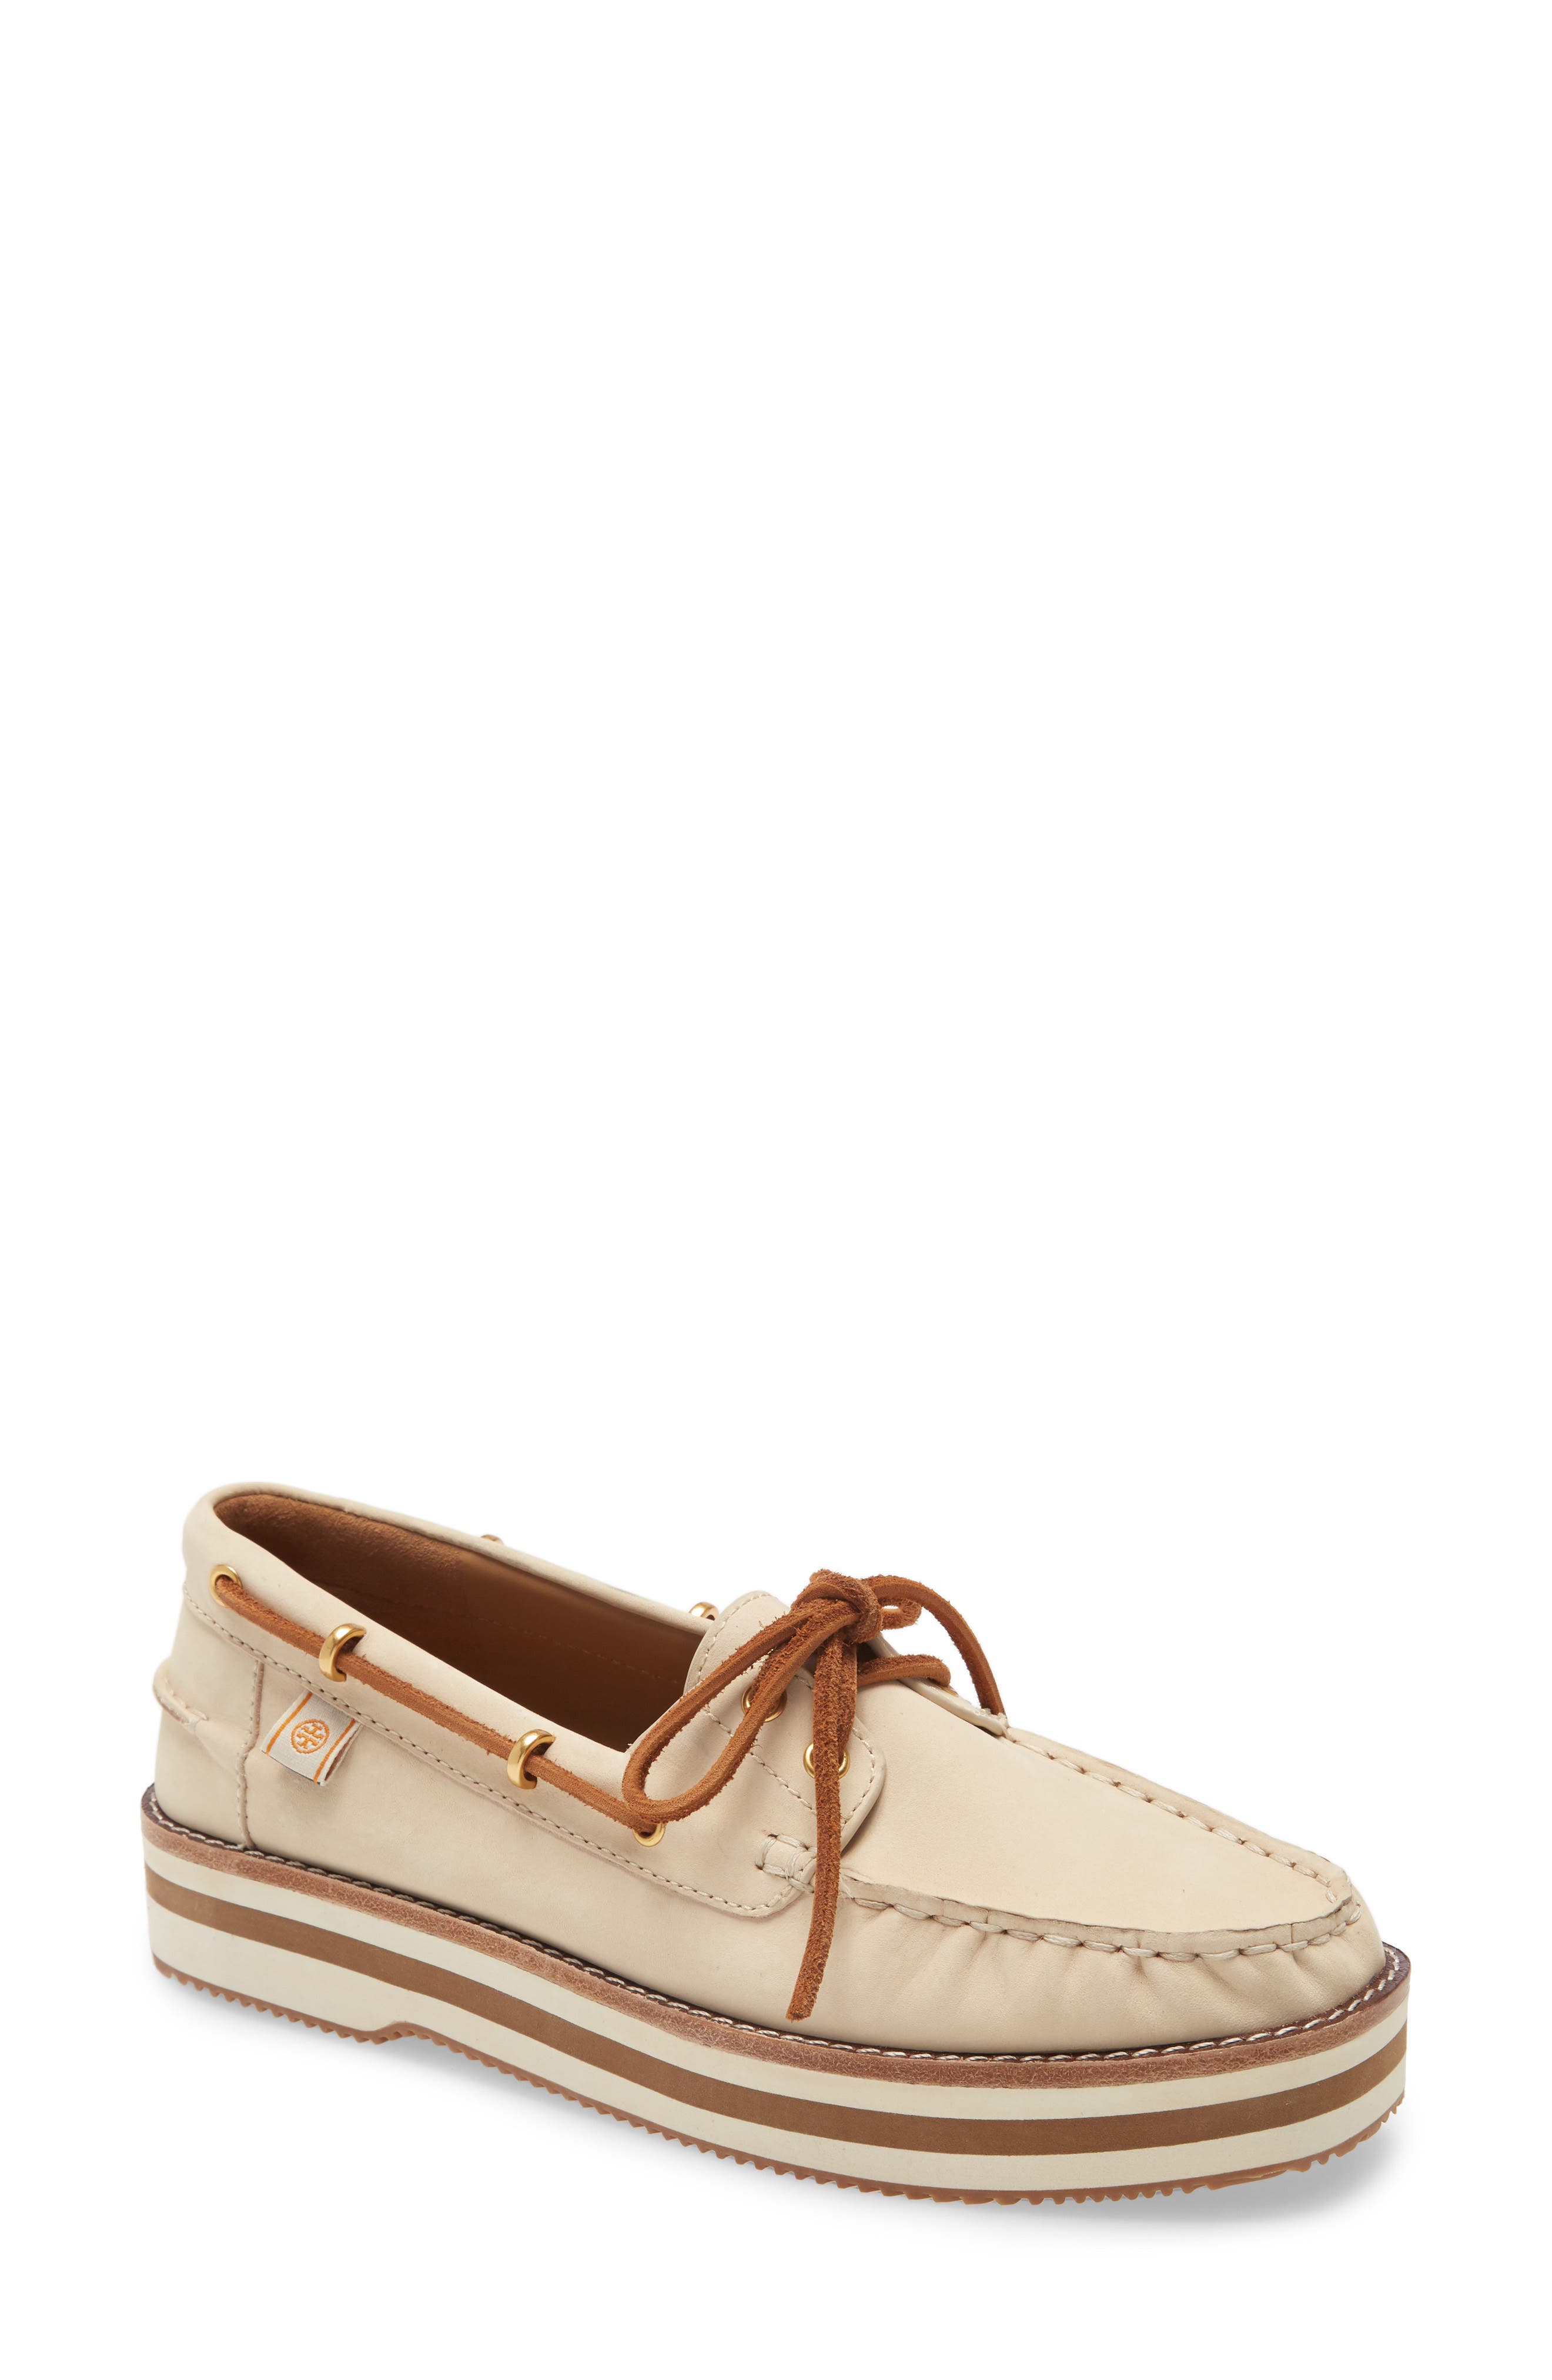 Boat Shoes Tory Burch Shoes | Nordstrom